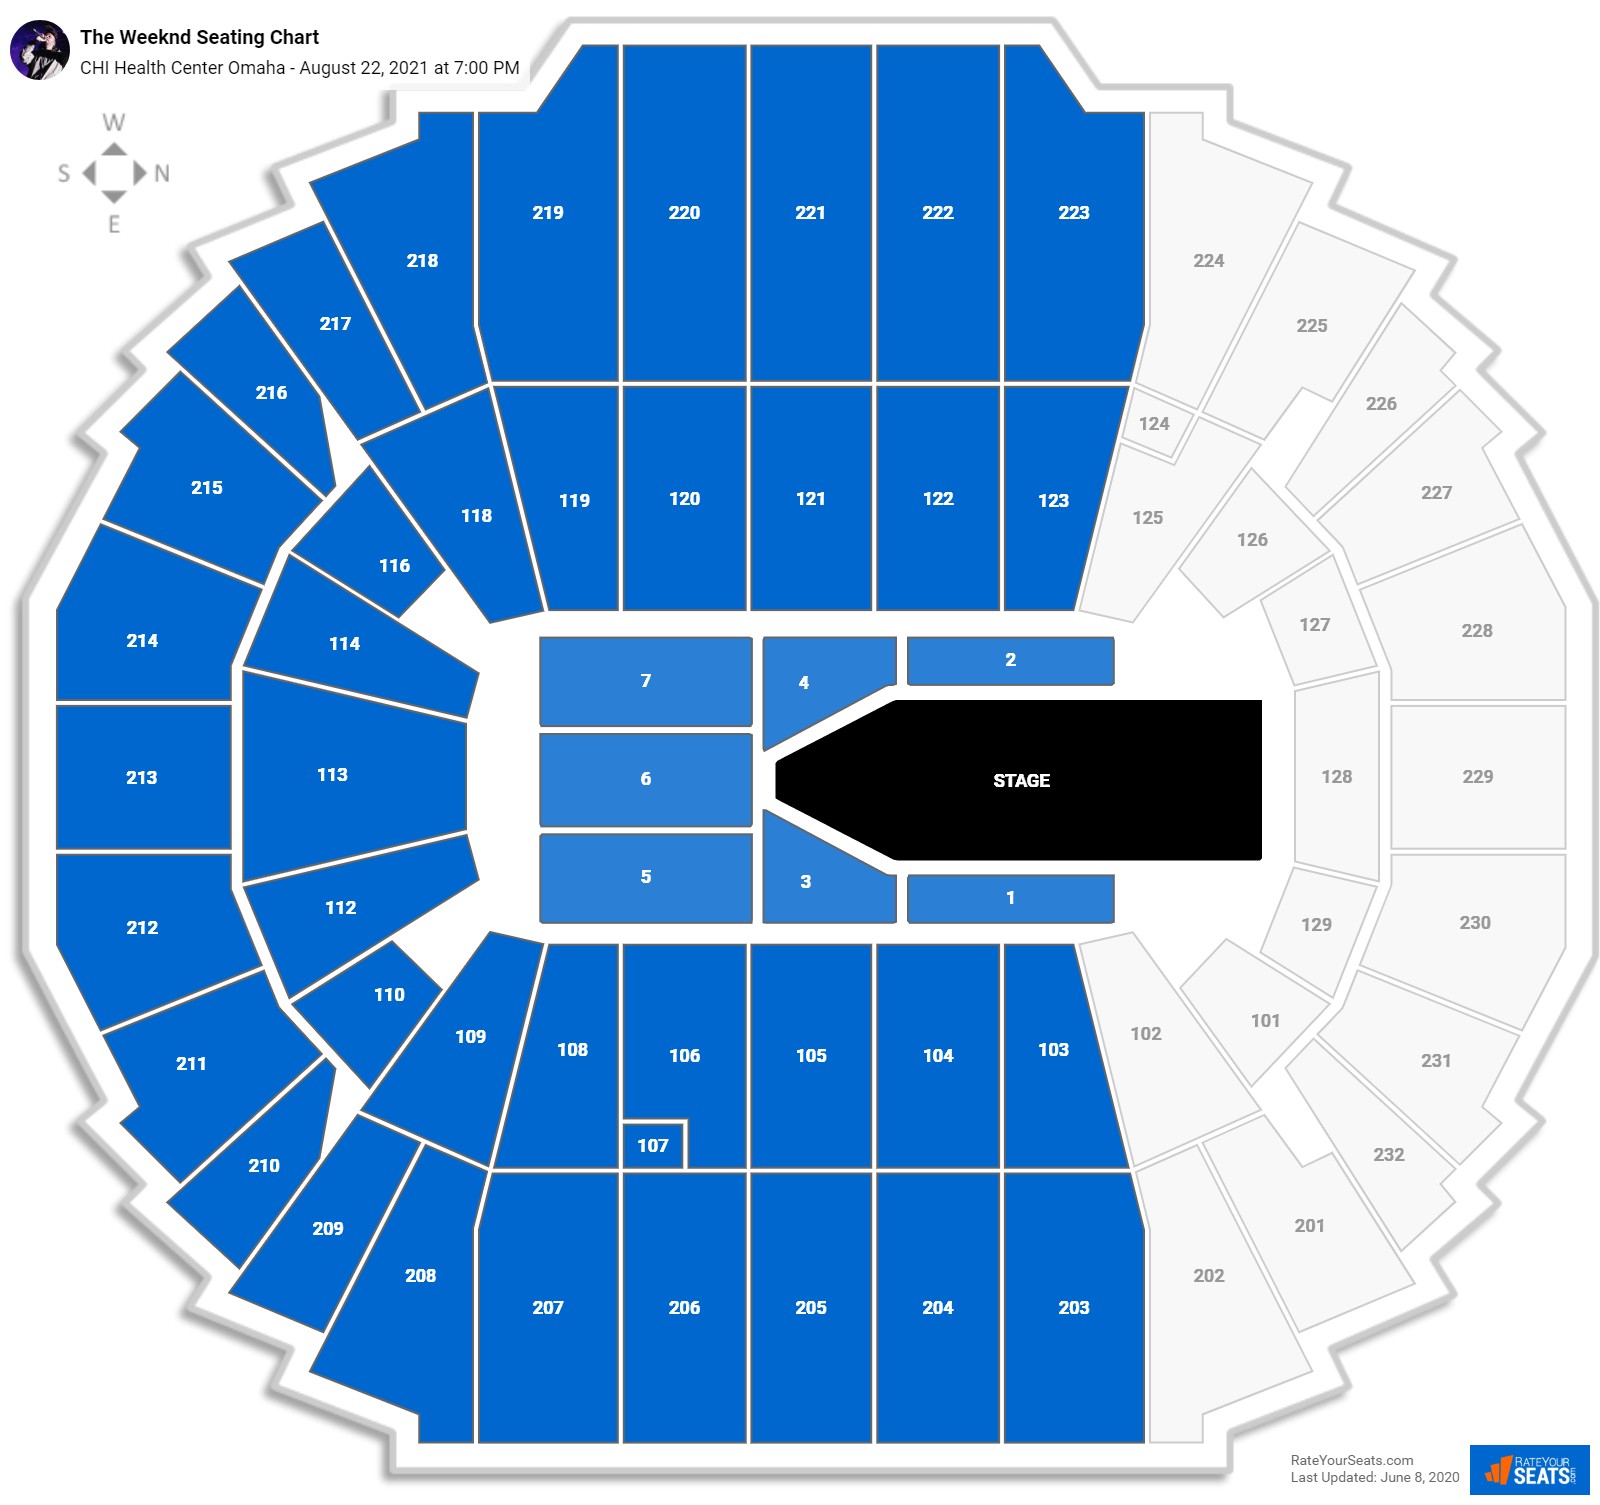 CHI Health Center Omaha Seating Charts for Concerts